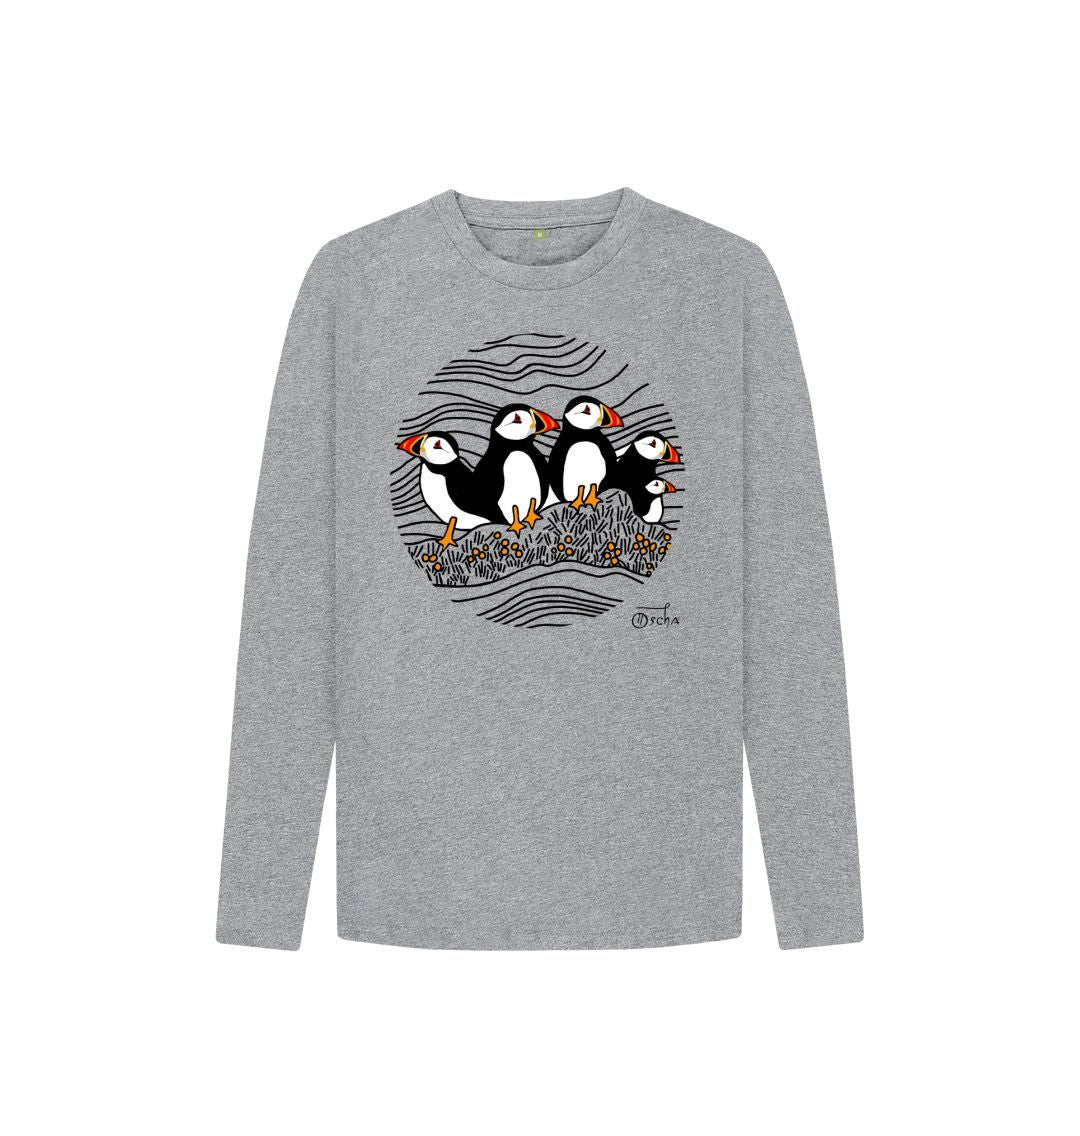 Athletic Grey Puffins Circus Kids Long Sleeved T-shirt